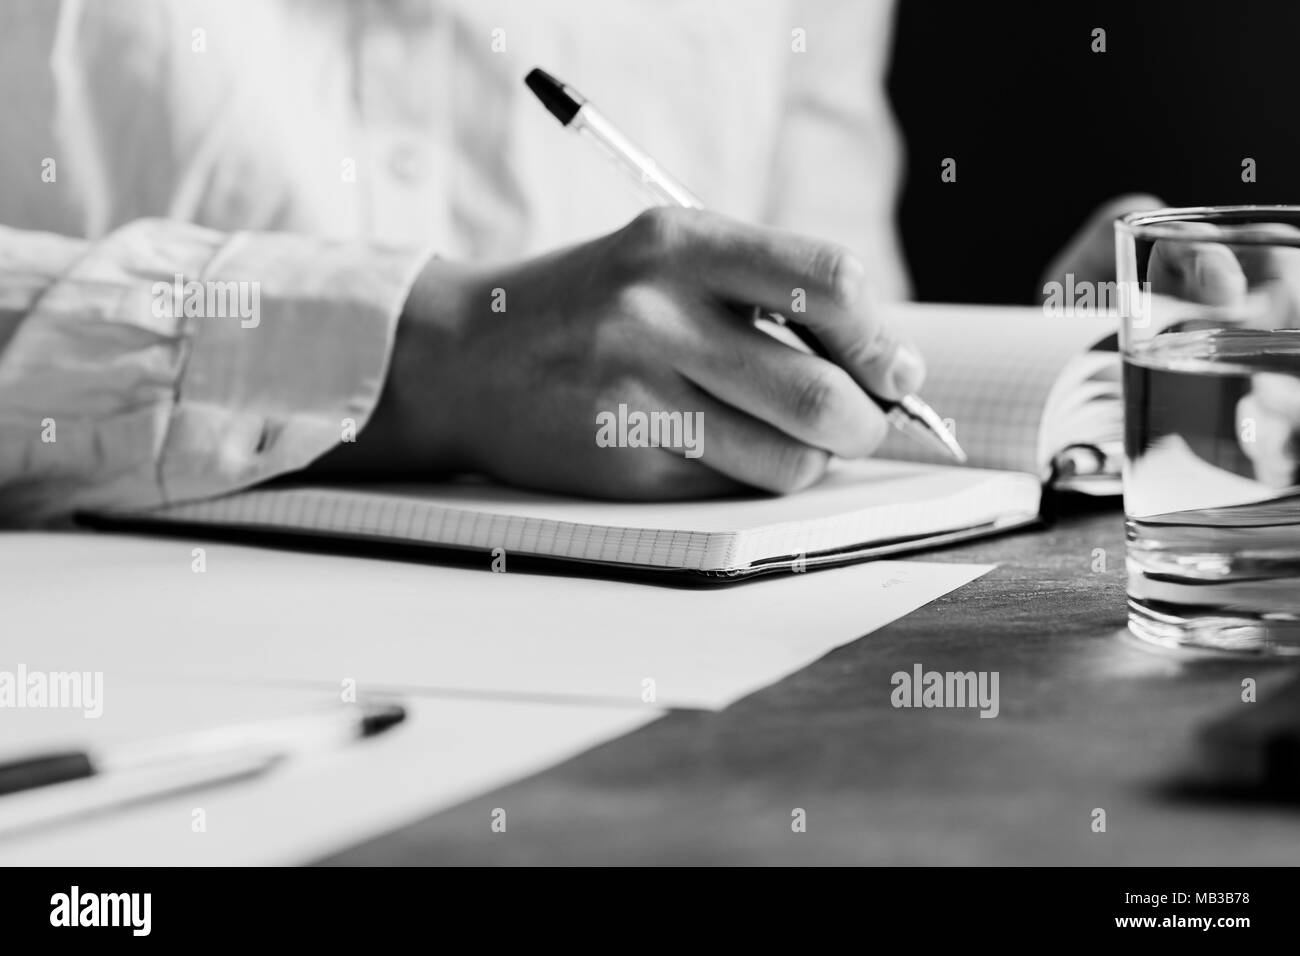 The man is writing in a notebook in a workplace. The concept of a work and education. Black and white photography. Stock Photo